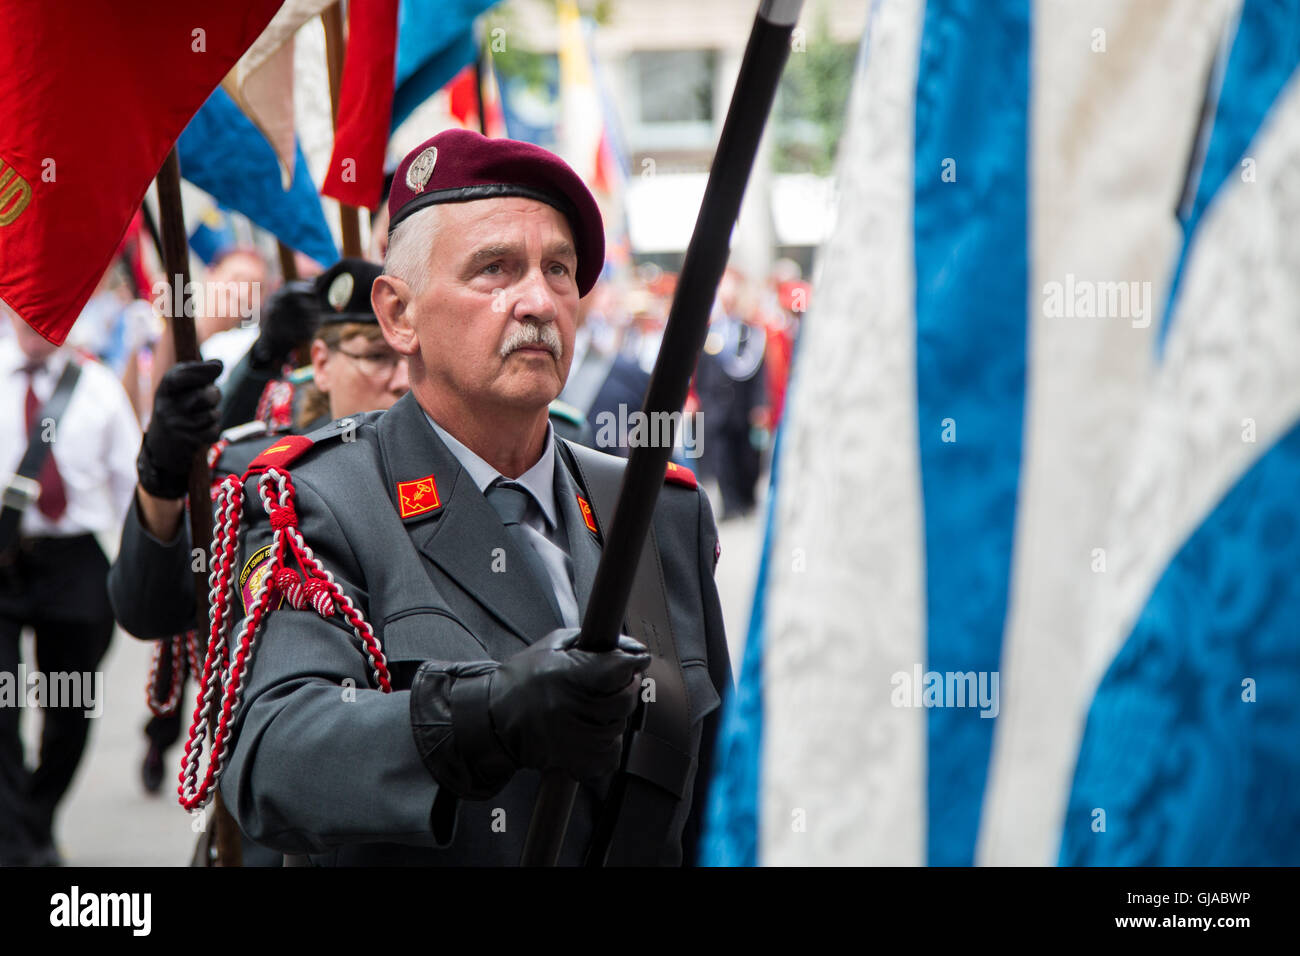 Zurich, Switzland. A flag bearer wears traditional dress at a ceremony in Zurich in celebration of Swiss National Day. Stock Photo